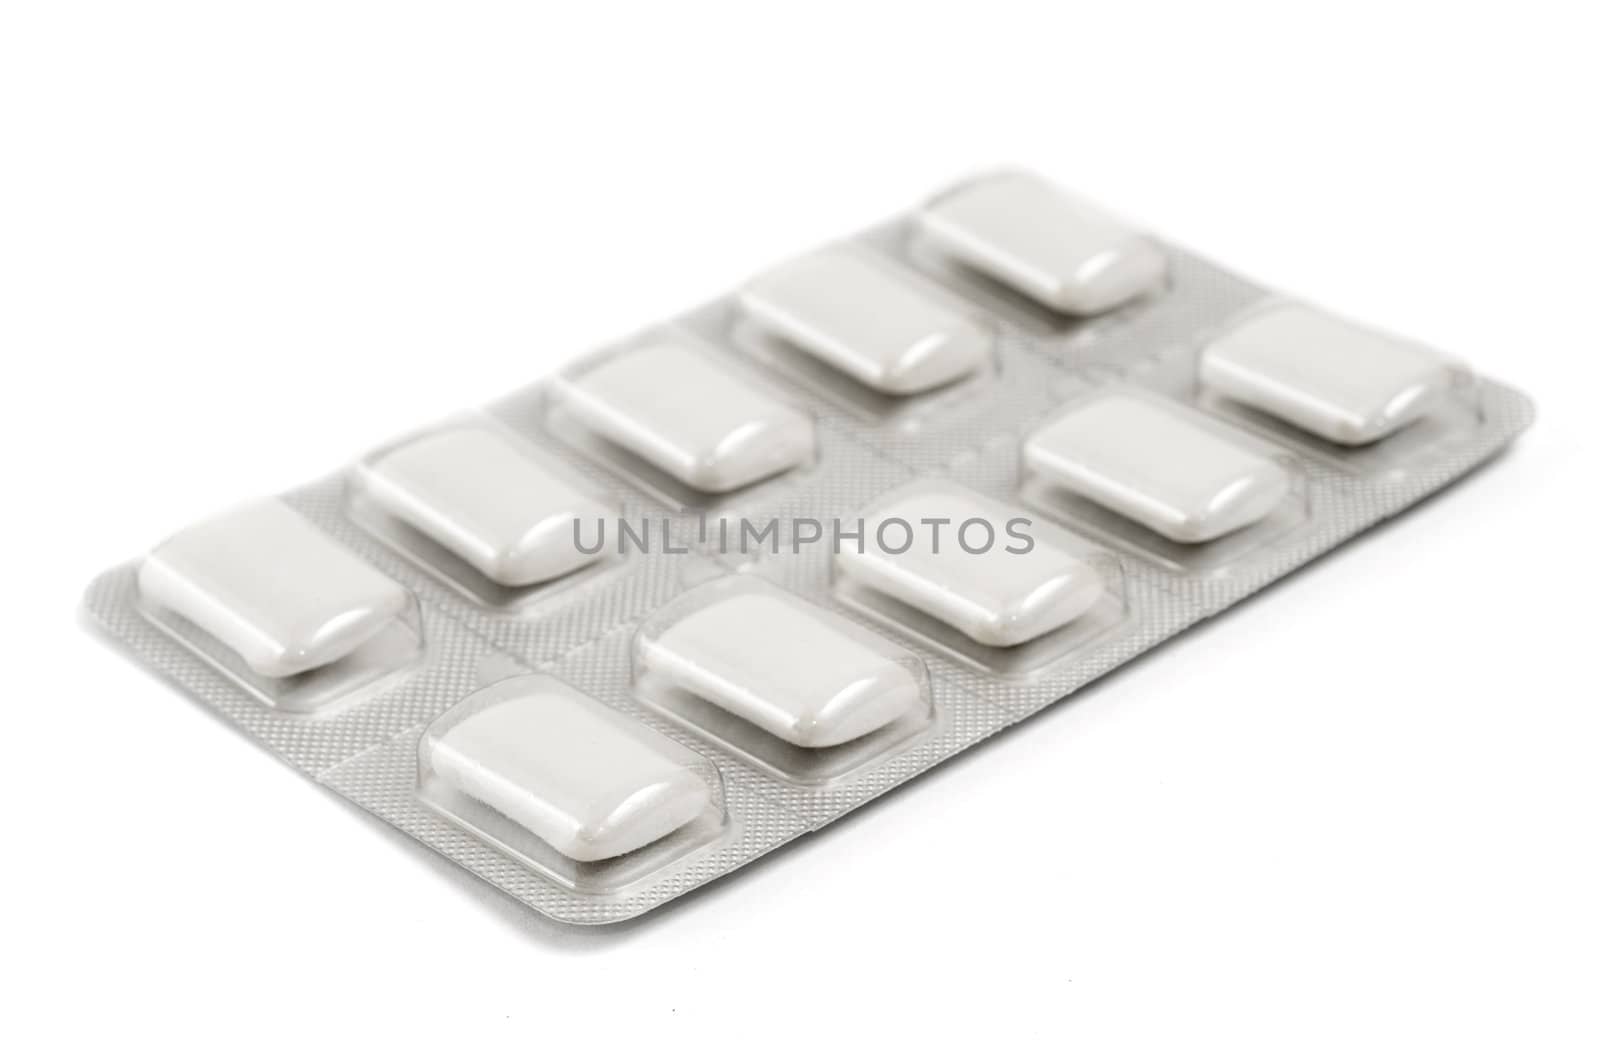 Selective focus on the foreground corner of a package of nicotine gum